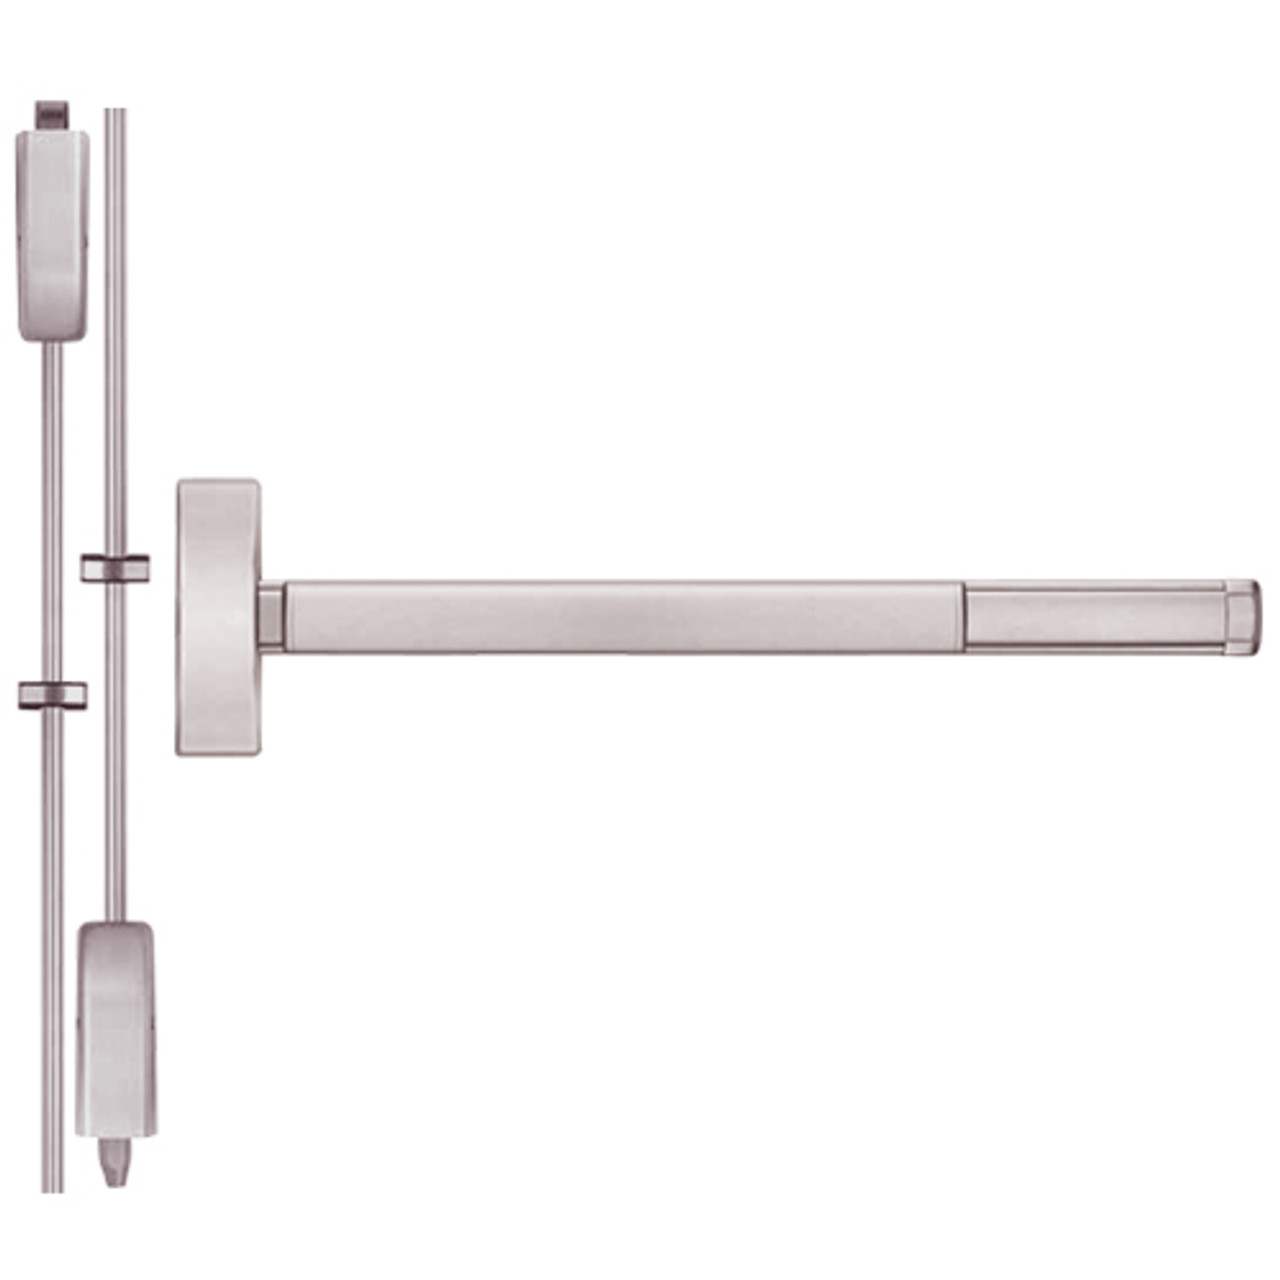 MLRFL2208-628-36 PHI 2200 Series Apex Surface Vertical Rod Device with Motorized Latch Retraction Prepped for Key Controls Lever/Knob in Satin Aluminum Finish